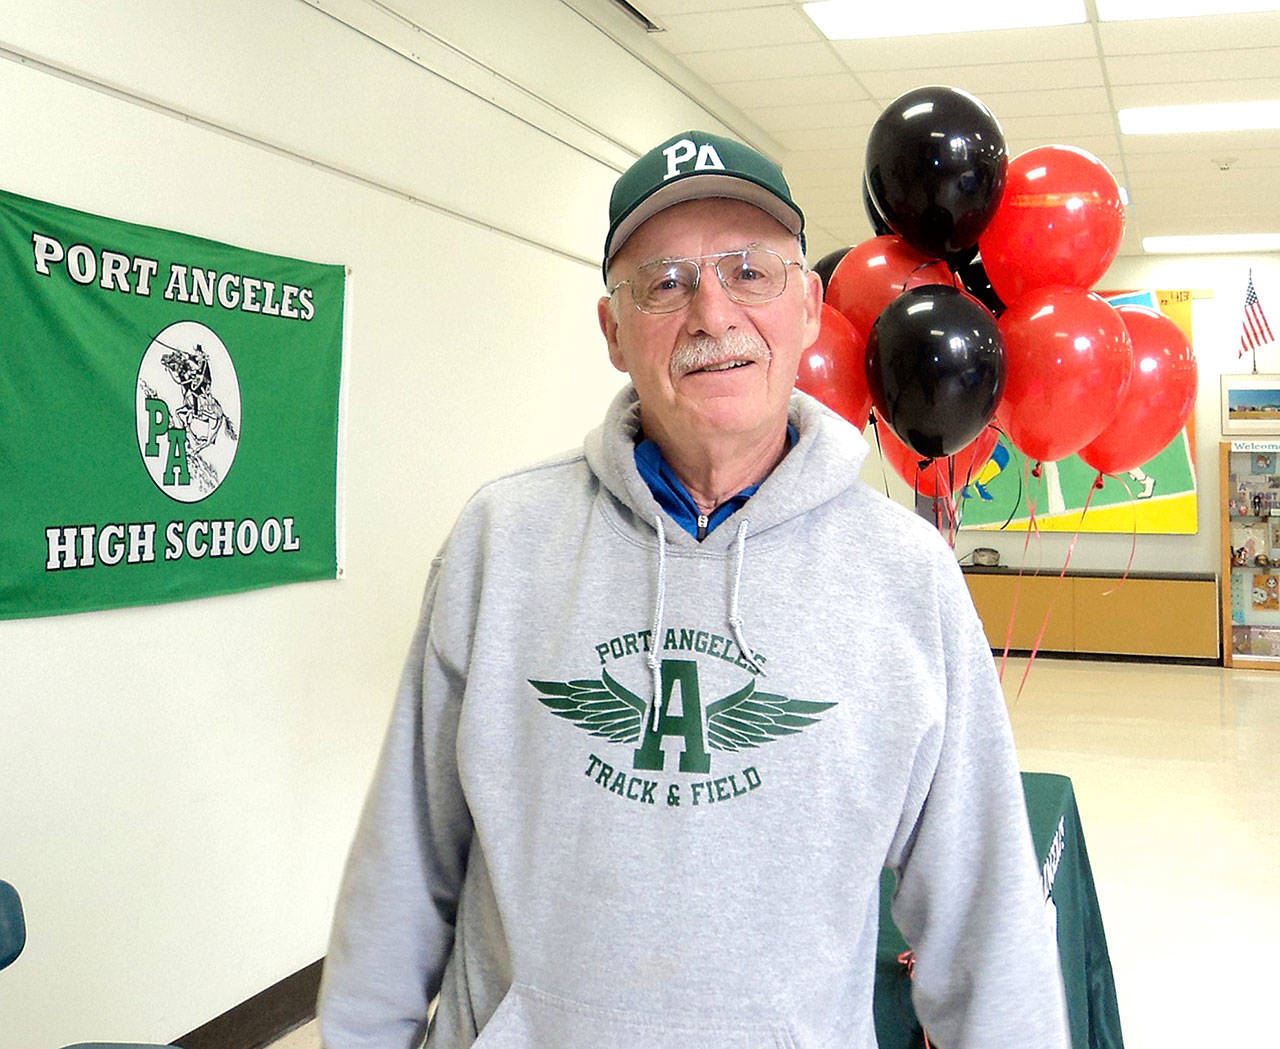 Port Angeles High School track and field coach Bob Sheedy is retiring after 46 years of coaching at the school. (Pierre LaBossiere/Peninsula Daily News)